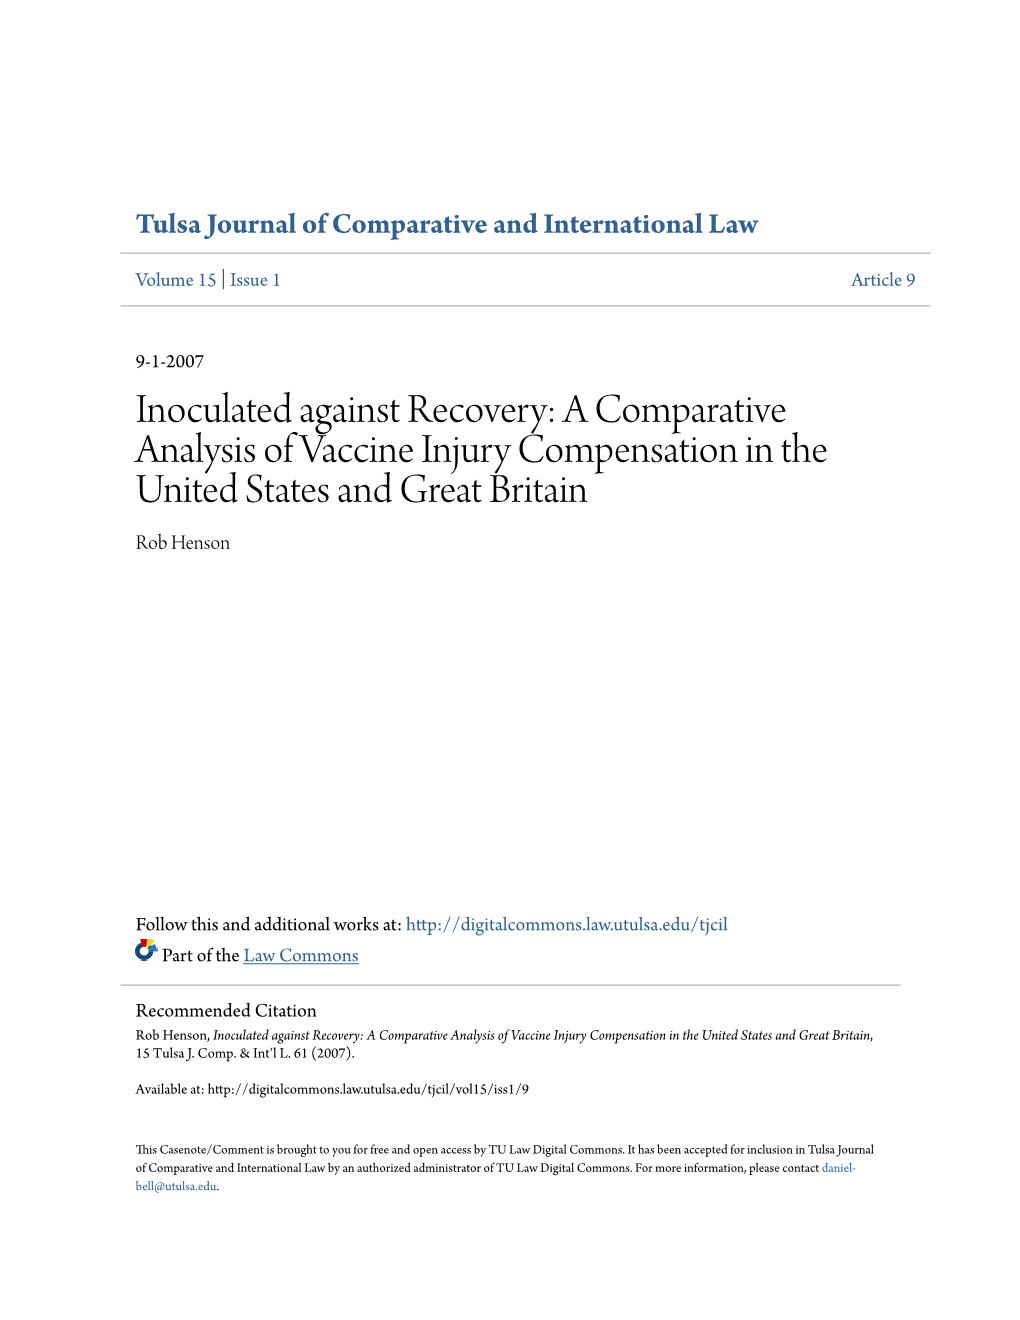 A Comparative Analysis of Vaccine Injury Compensation in the United States and Great Britain Rob Henson